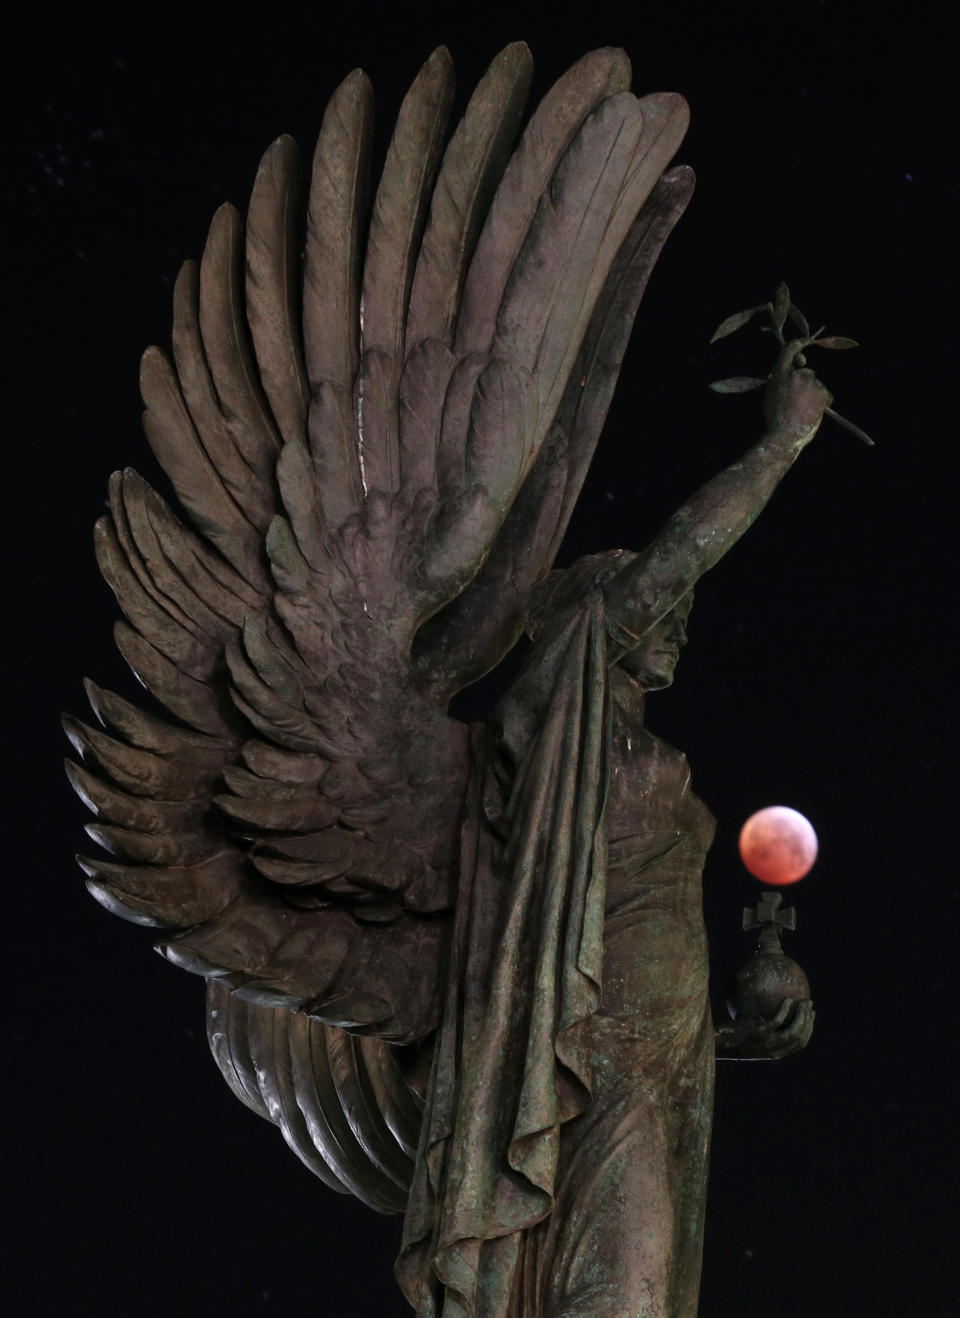 The super blood wolf moon over the peace statue on the seafront in Brighton, England.